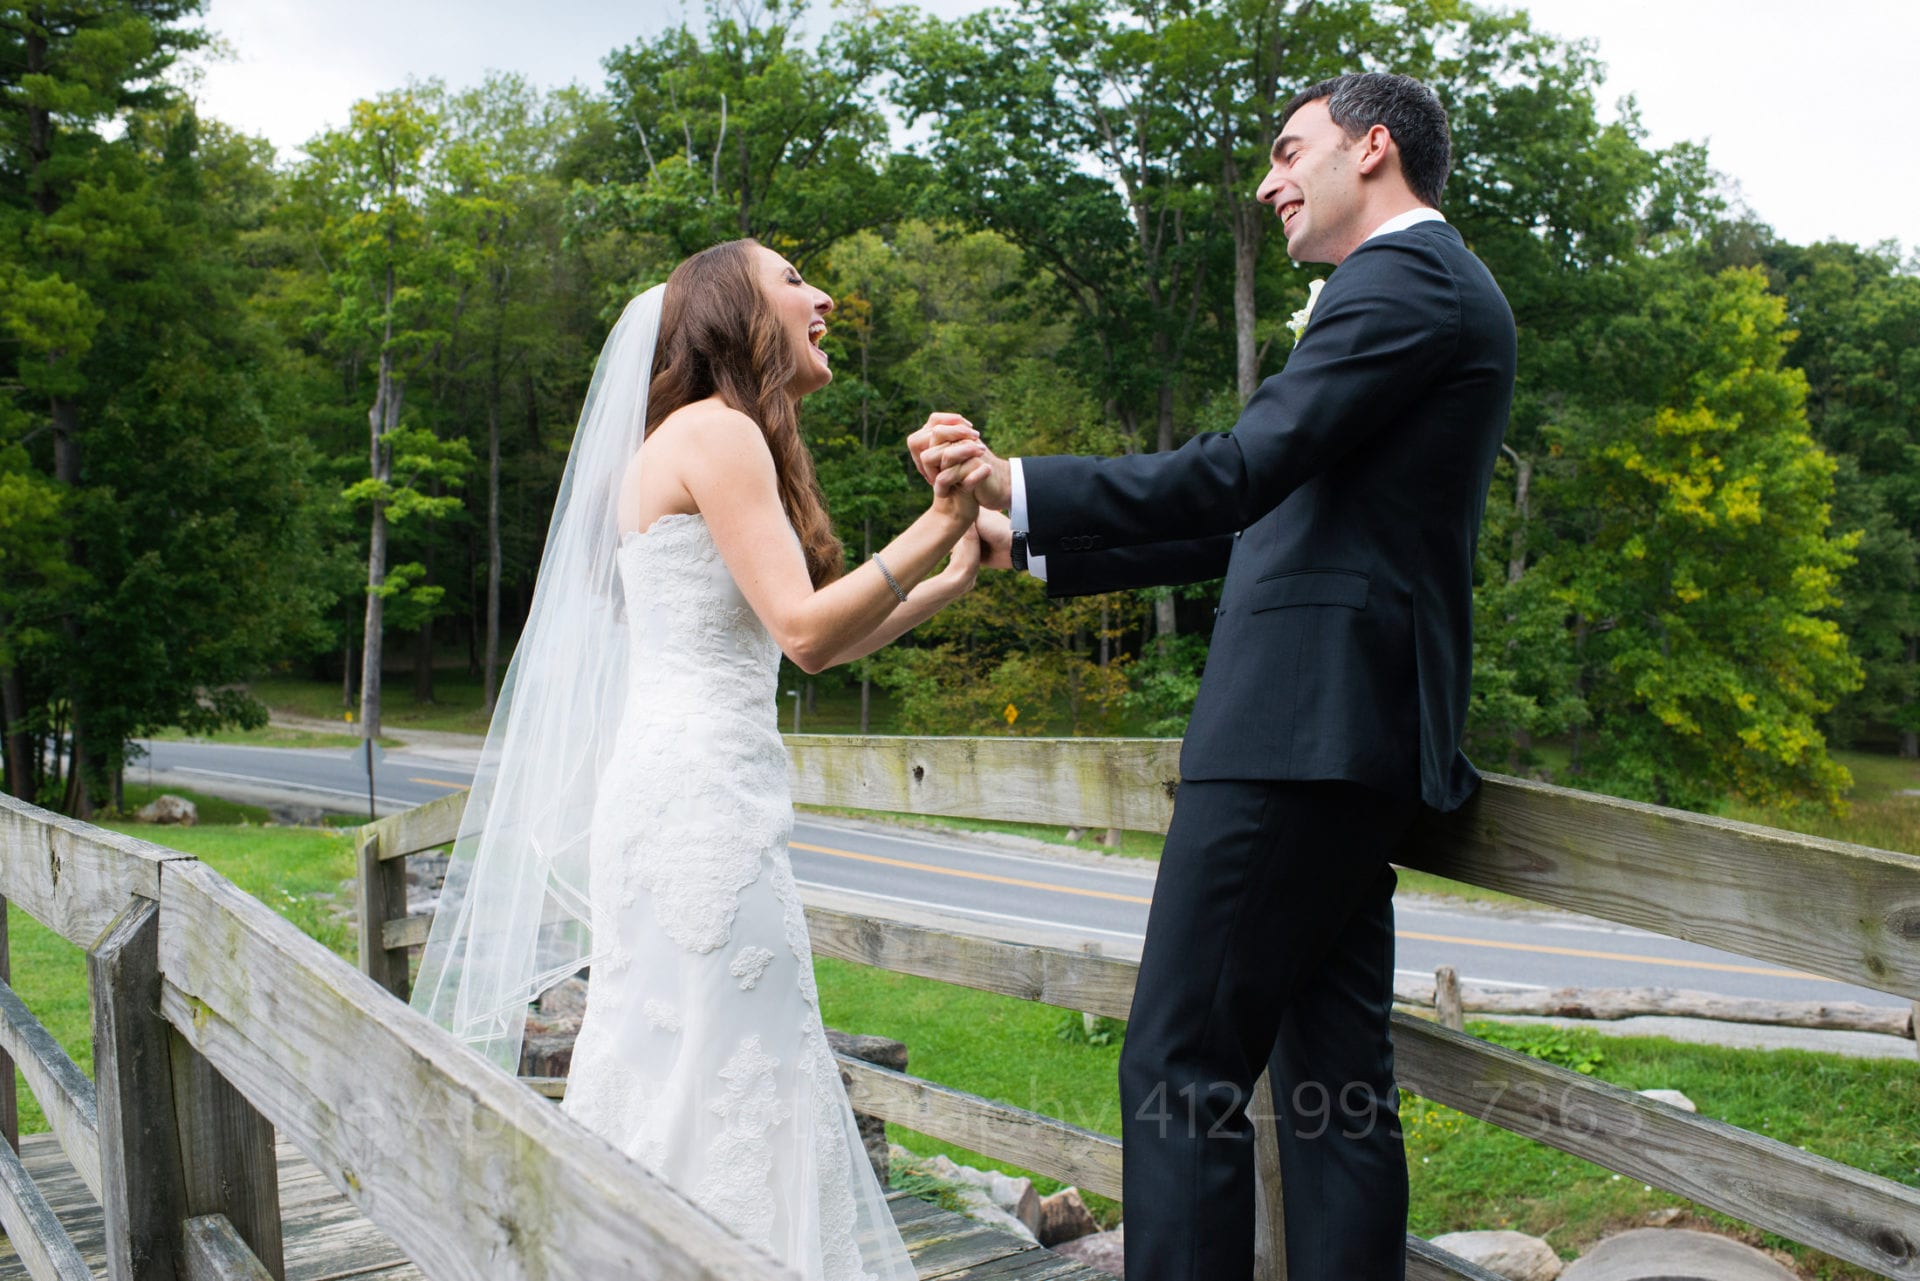 A bride and groom hold each others hands in front of them as they stand on a small bridge that crosses a stream. They're expressions are joyful.